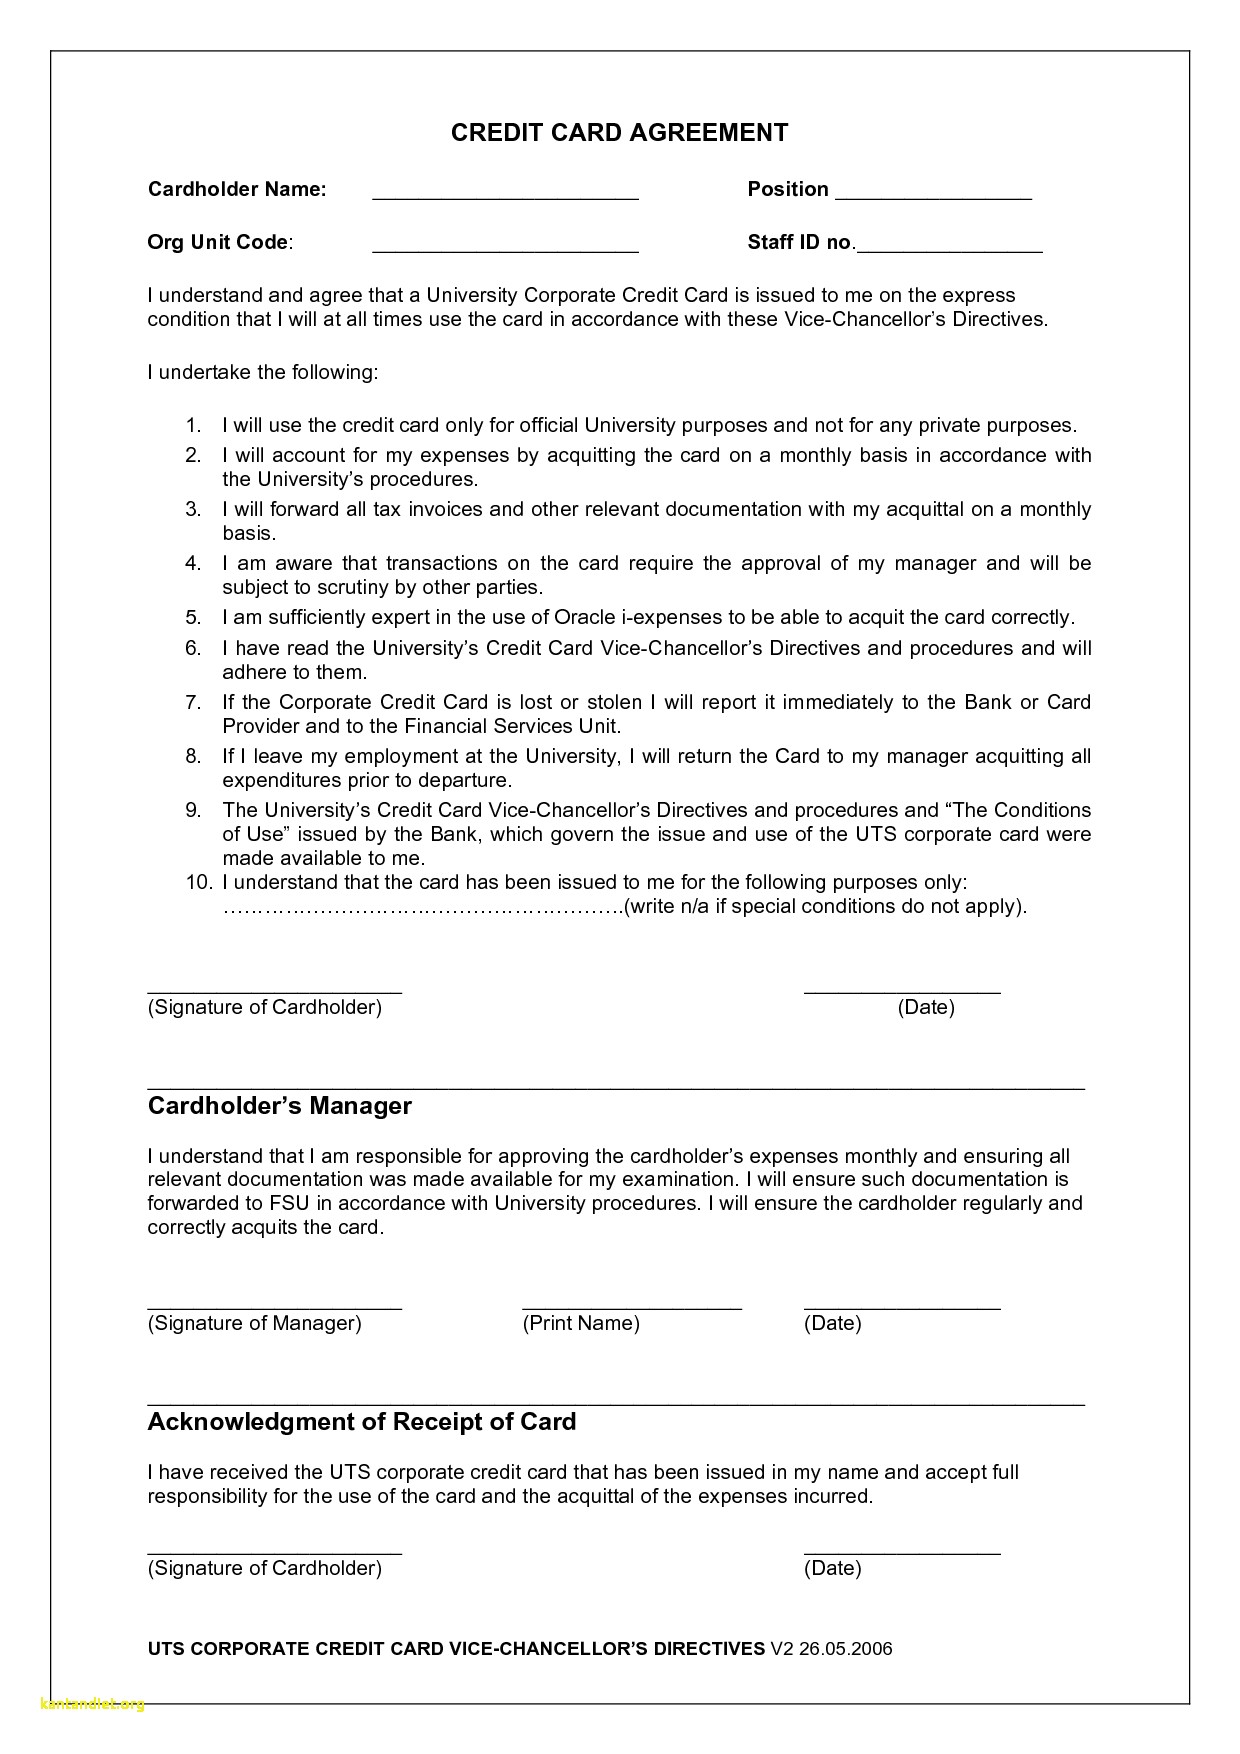 acquittal report template Lovely Employee Credit Card Agreement 